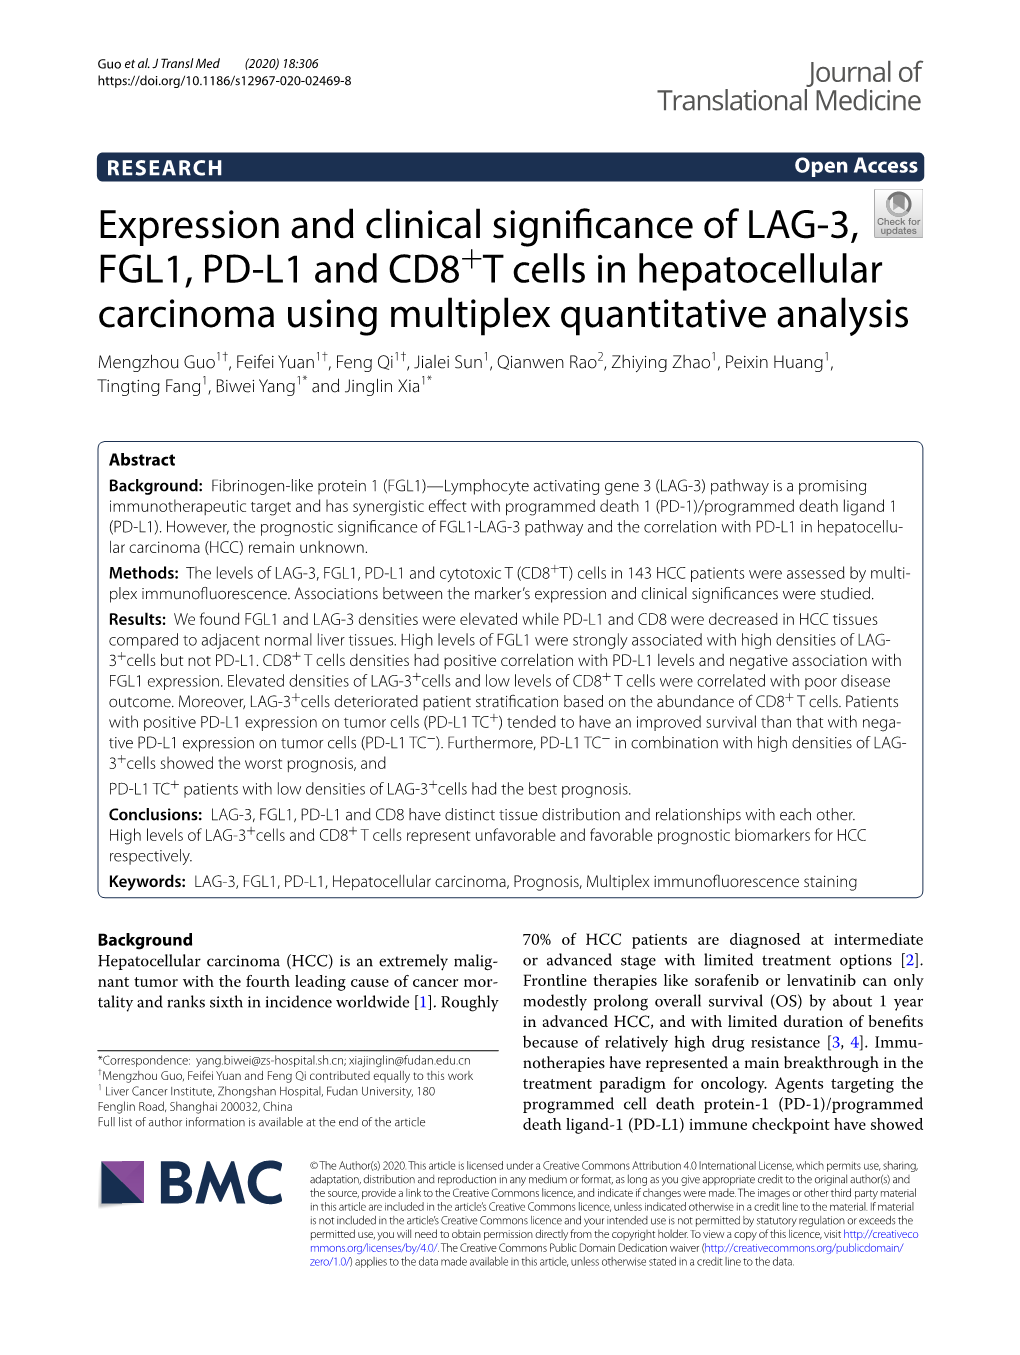 Expression and Clinical Significance of LAG-3, FGL1, PD-L1 and CD8+T